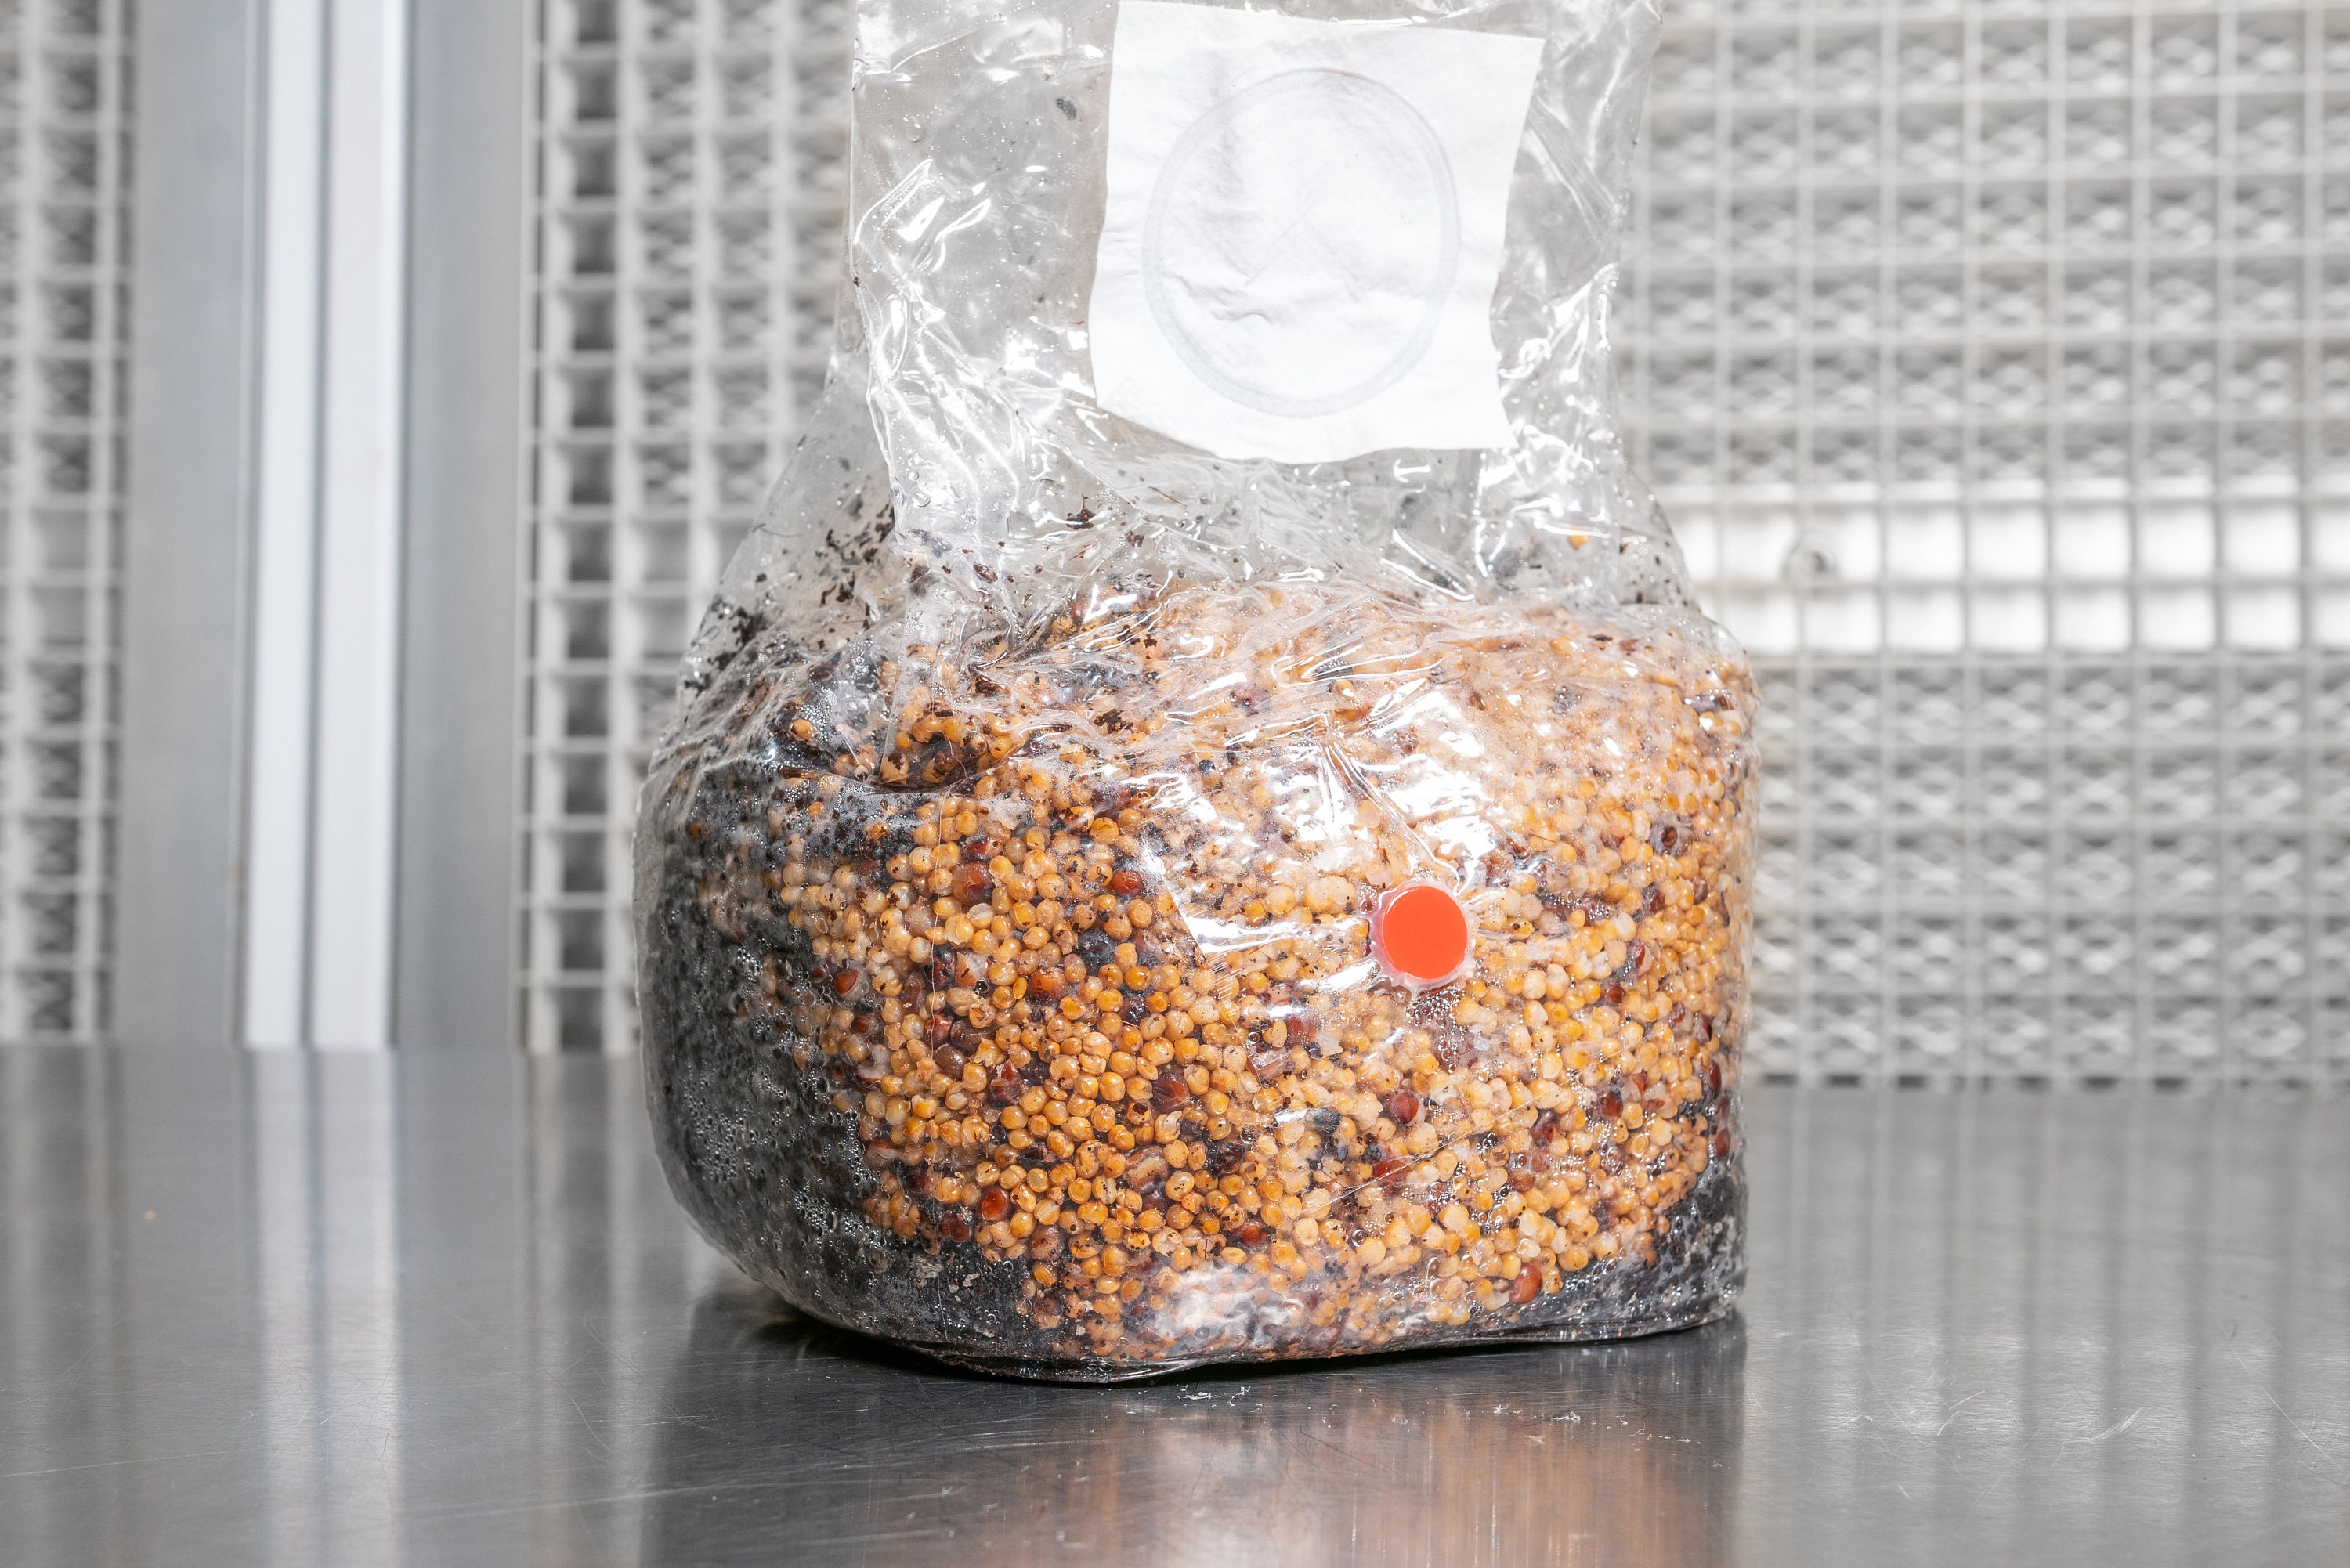 Spawn Bags vs. Substrate Jars: Which Is Best for Growing?